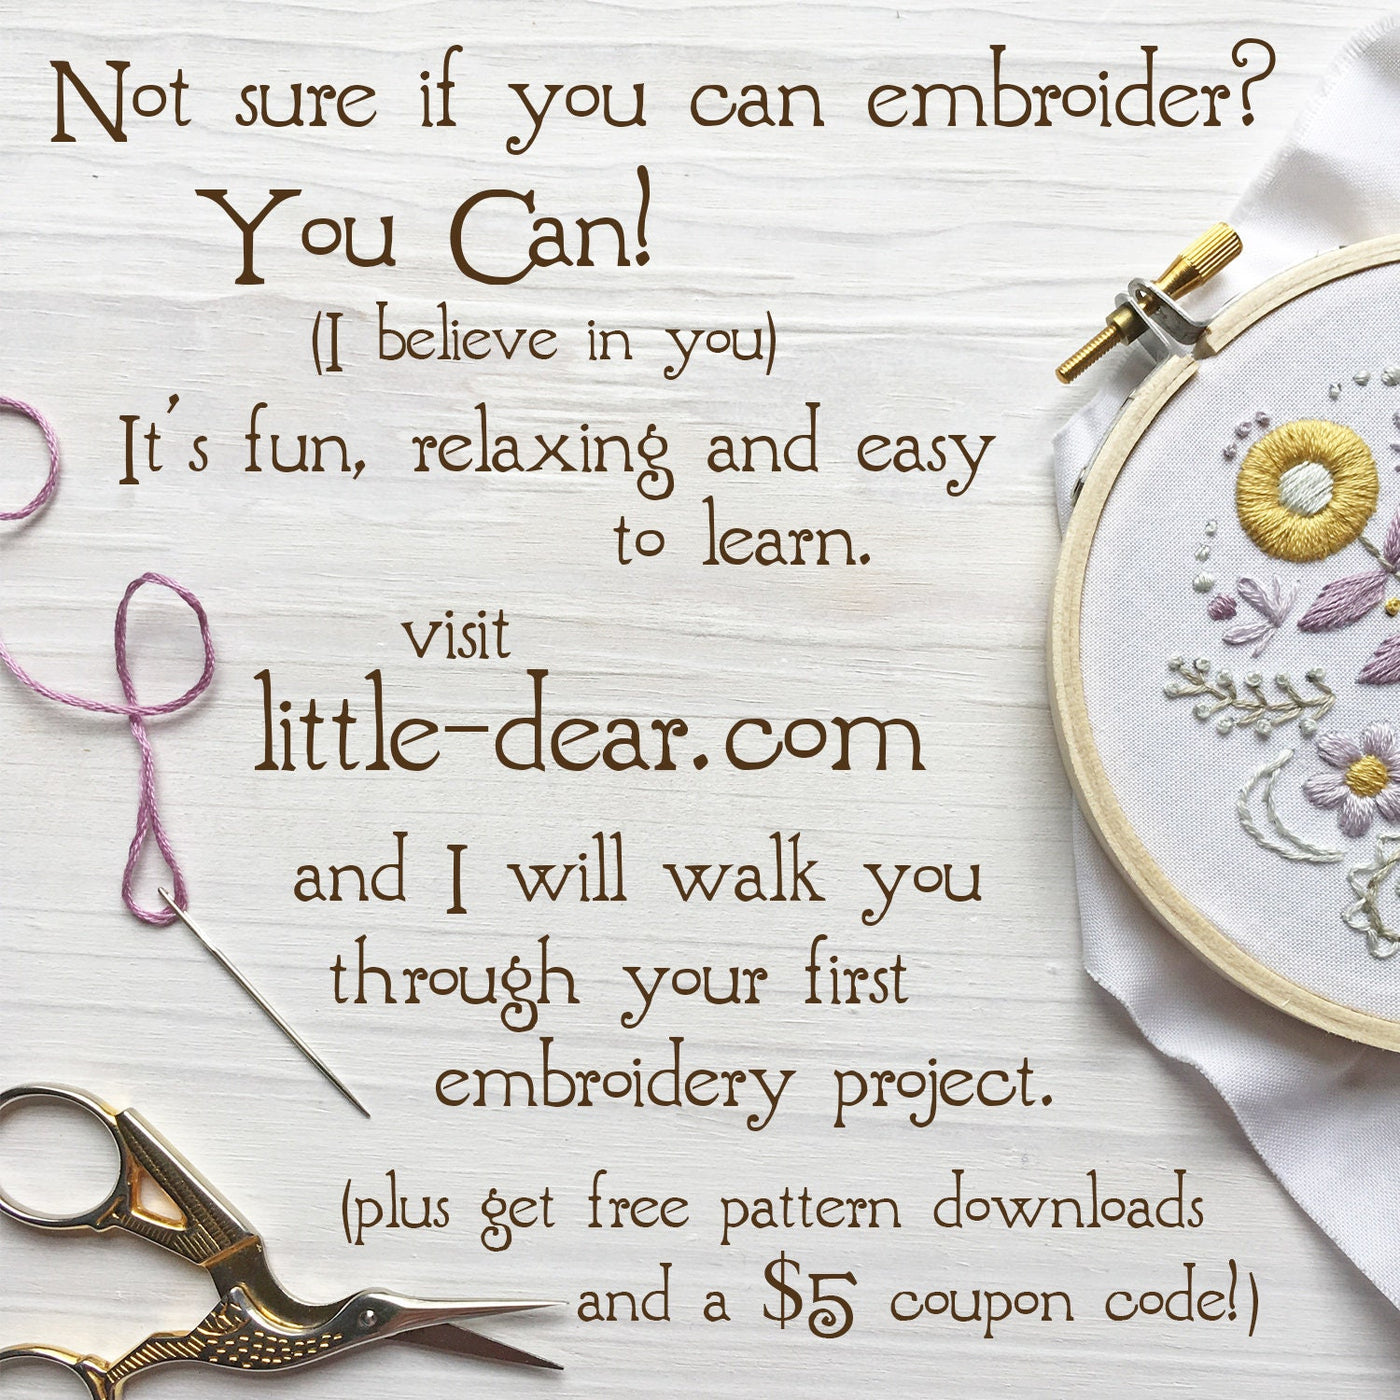 6 Tiny Collections embroidery patterns, mini Mushrooms, Succulents, Acorns, Crystals, Herbs and Leaves